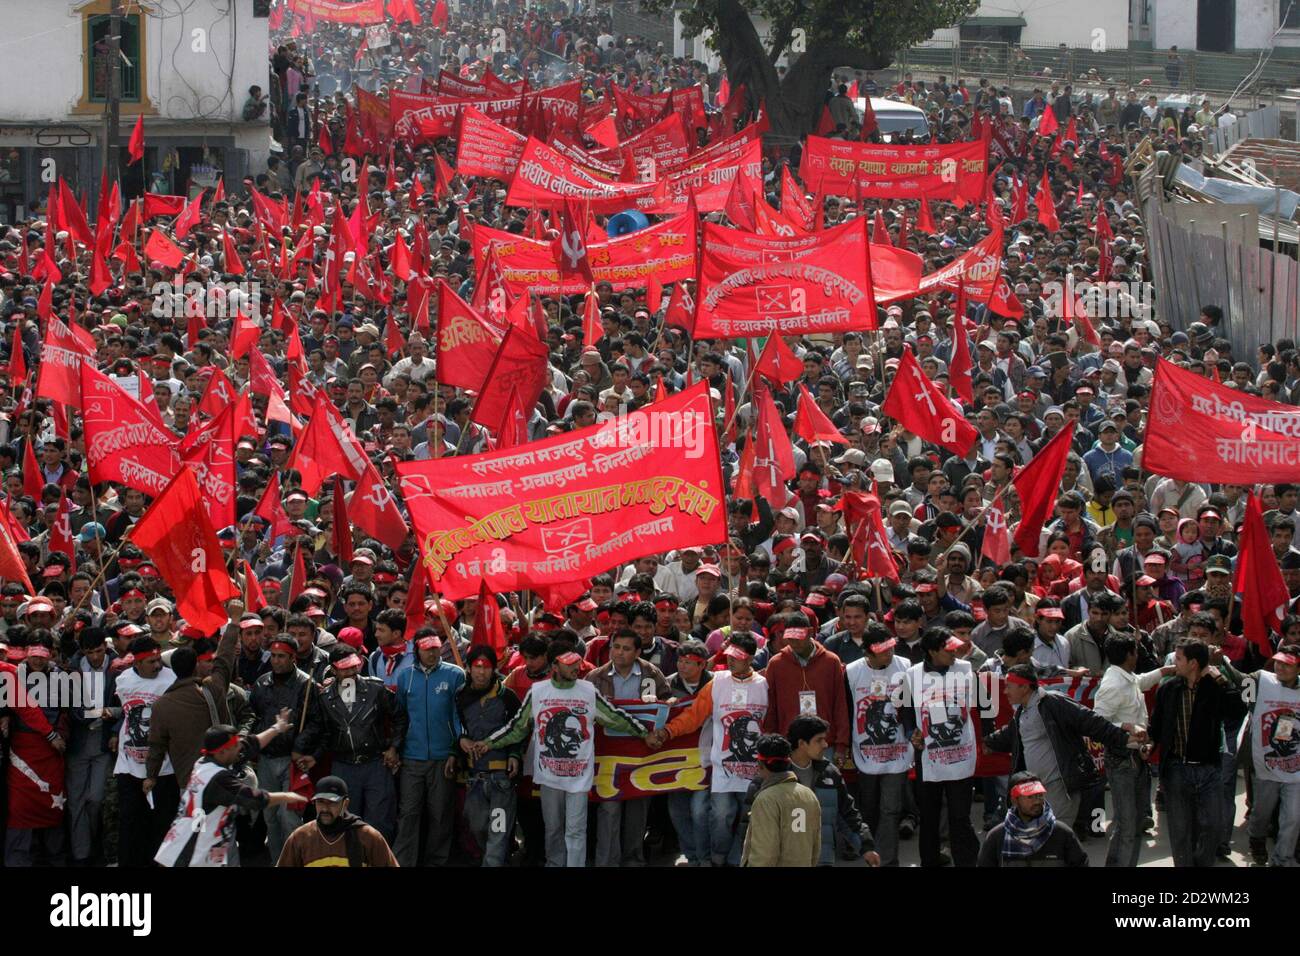 Communist Party of Nepal (Maoist) supporters take part in a rally in Kathmandu February 13, 2007. Thousands of supporters of former Maoist rebels held a mass demonstration in the Nepali capital on